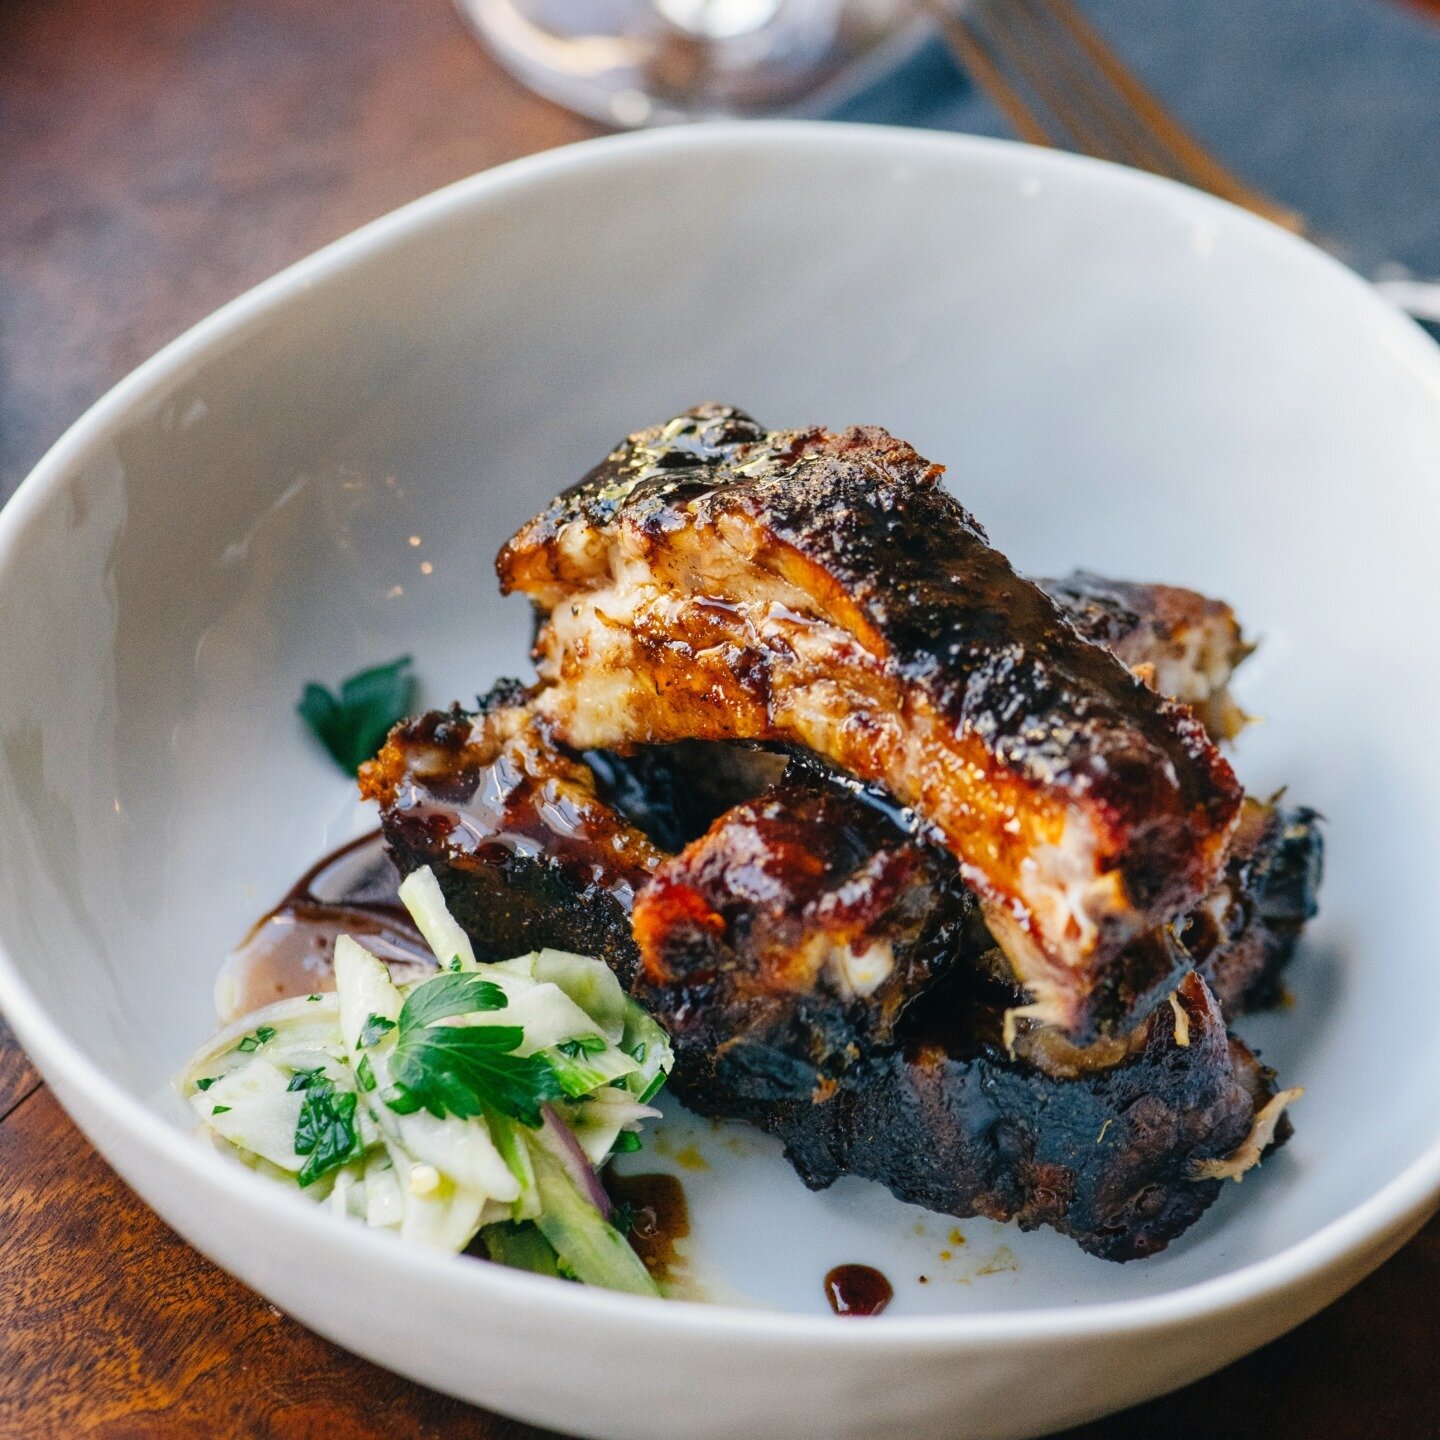 Who is ready for the weekend? Stop in for Tapas or Dinner. We're open Saturday from 12pm-10pm. 

Ft. our Costillas a la Portillo &middot; Slow smoked St. Louis ribs finished on the @josperofficial with a bourbon sherry glaze. #laurelonrutledge